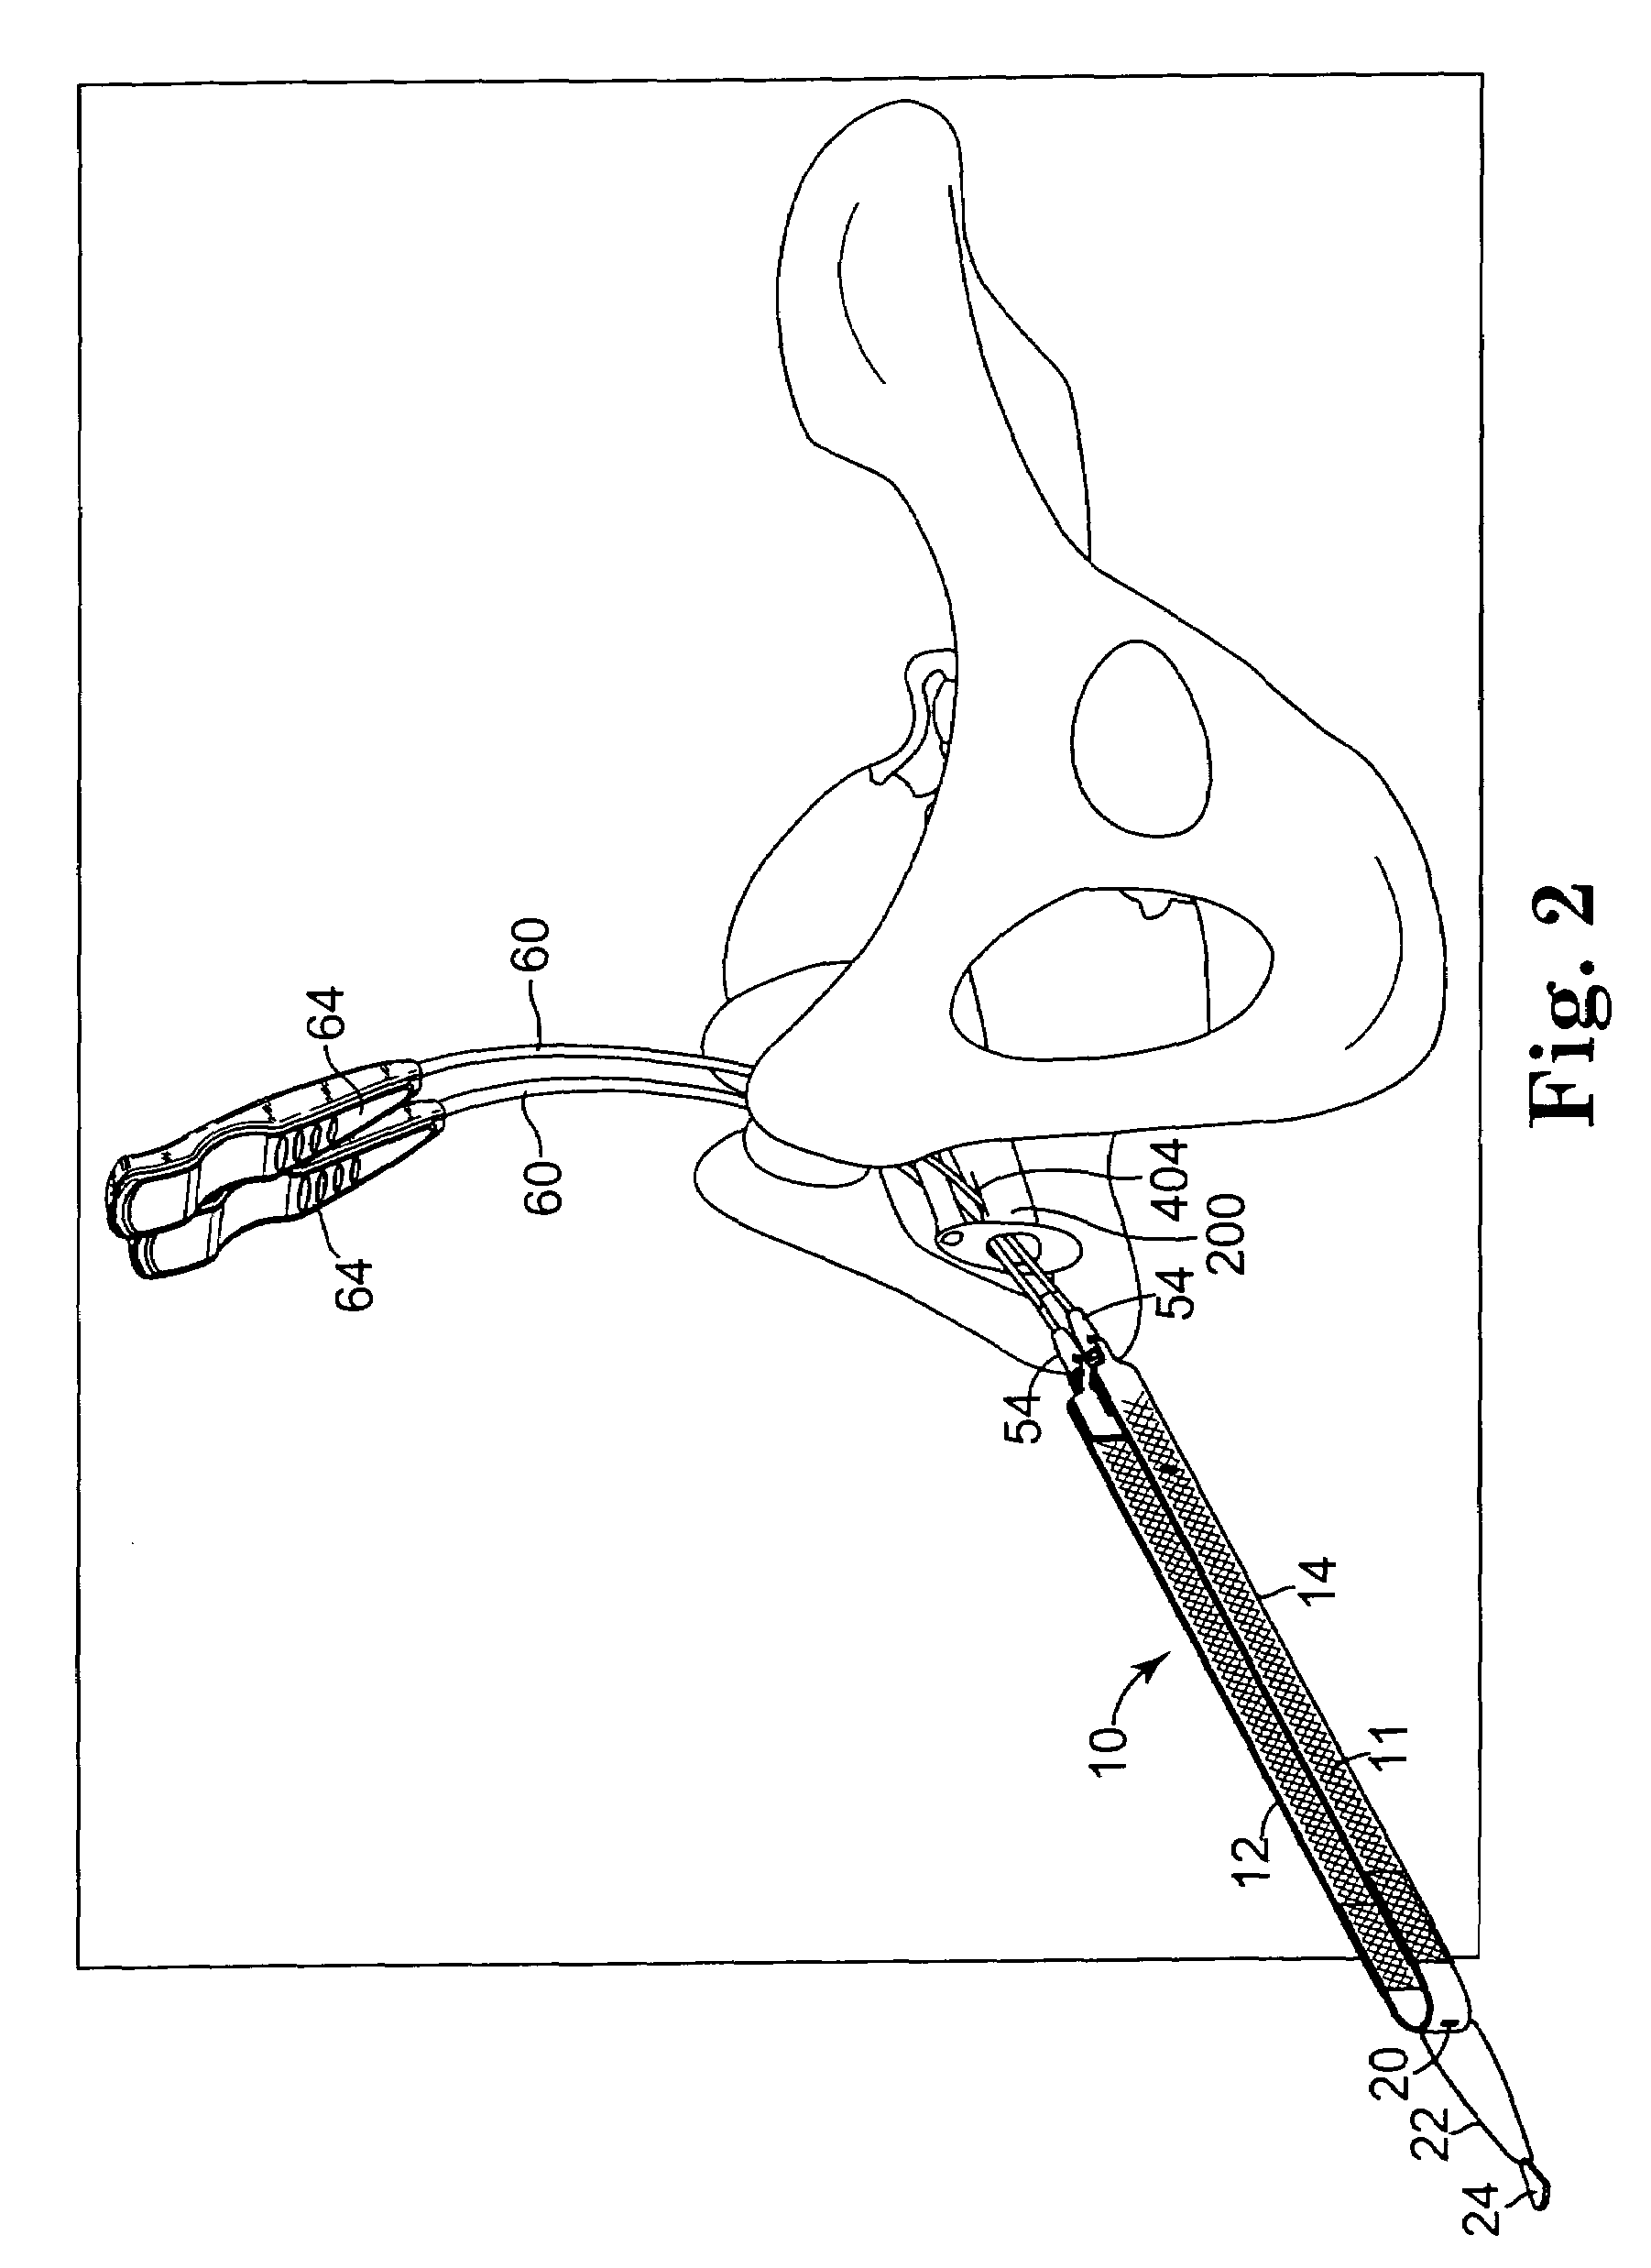 Surgical article and methods for treating female urinary incontinence